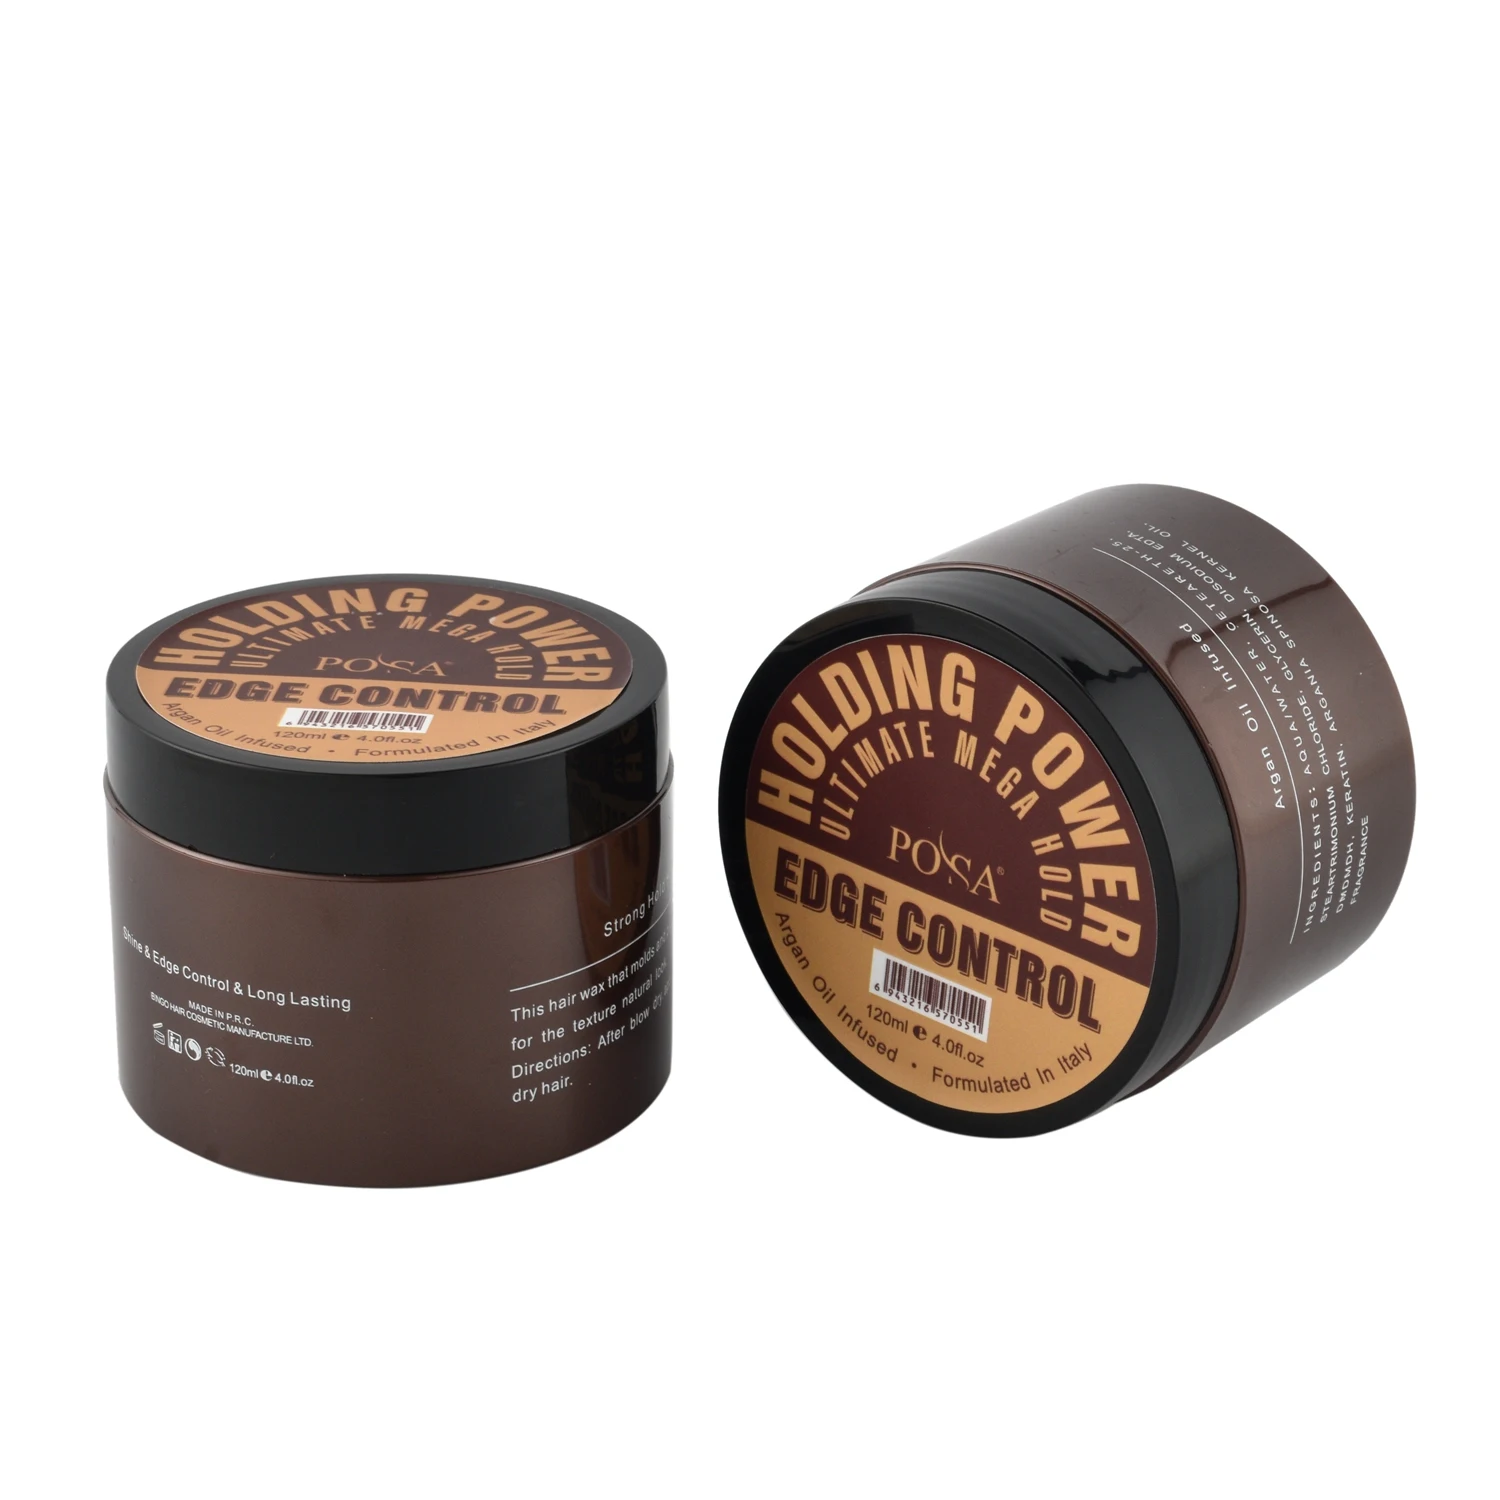 

POSA Home Use Edge Control Extreme Firm Hold In Non-sticky Non-Flake Formula For Crazy Holds